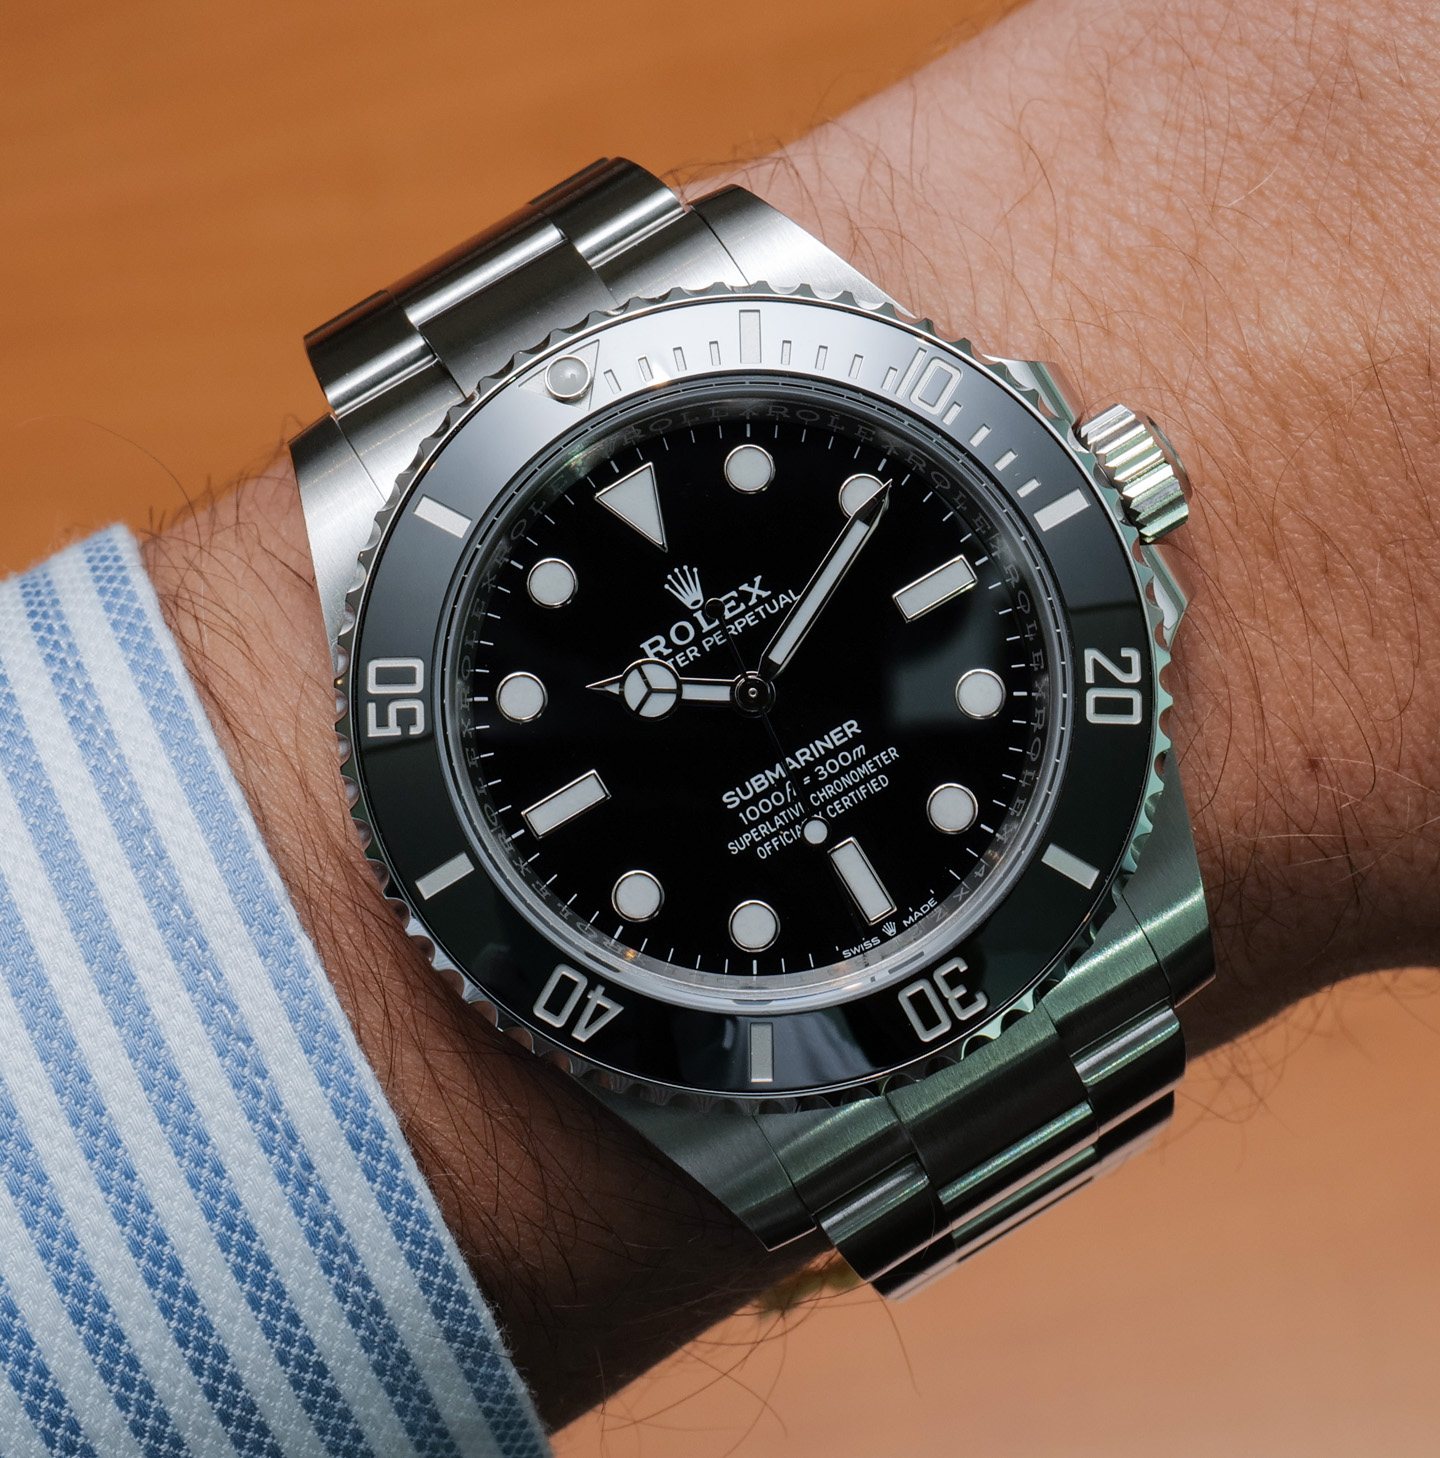 Hands-On: Rolex 'No Date' 124060 Watch For 2020 | aBlogtoWatch